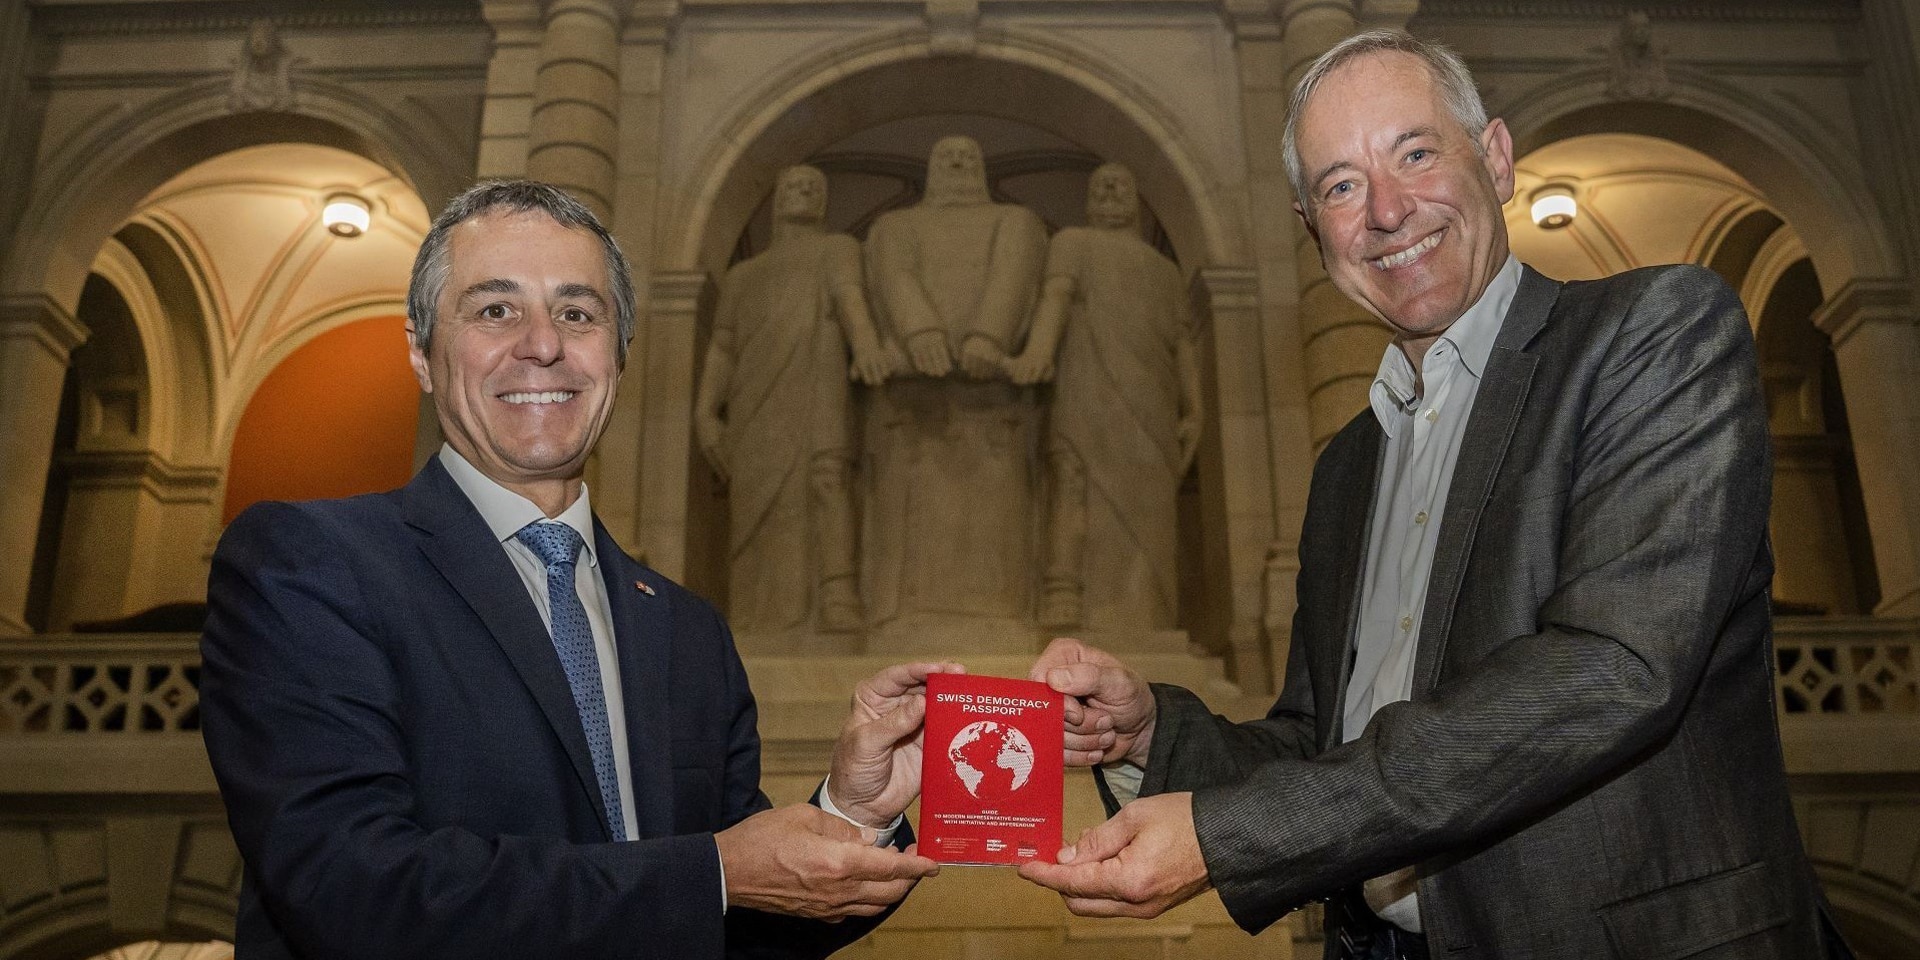 Federal Councillor Ignazio Cassis and Bruno Kaufmann pose with the Swiss Democracy Passport.